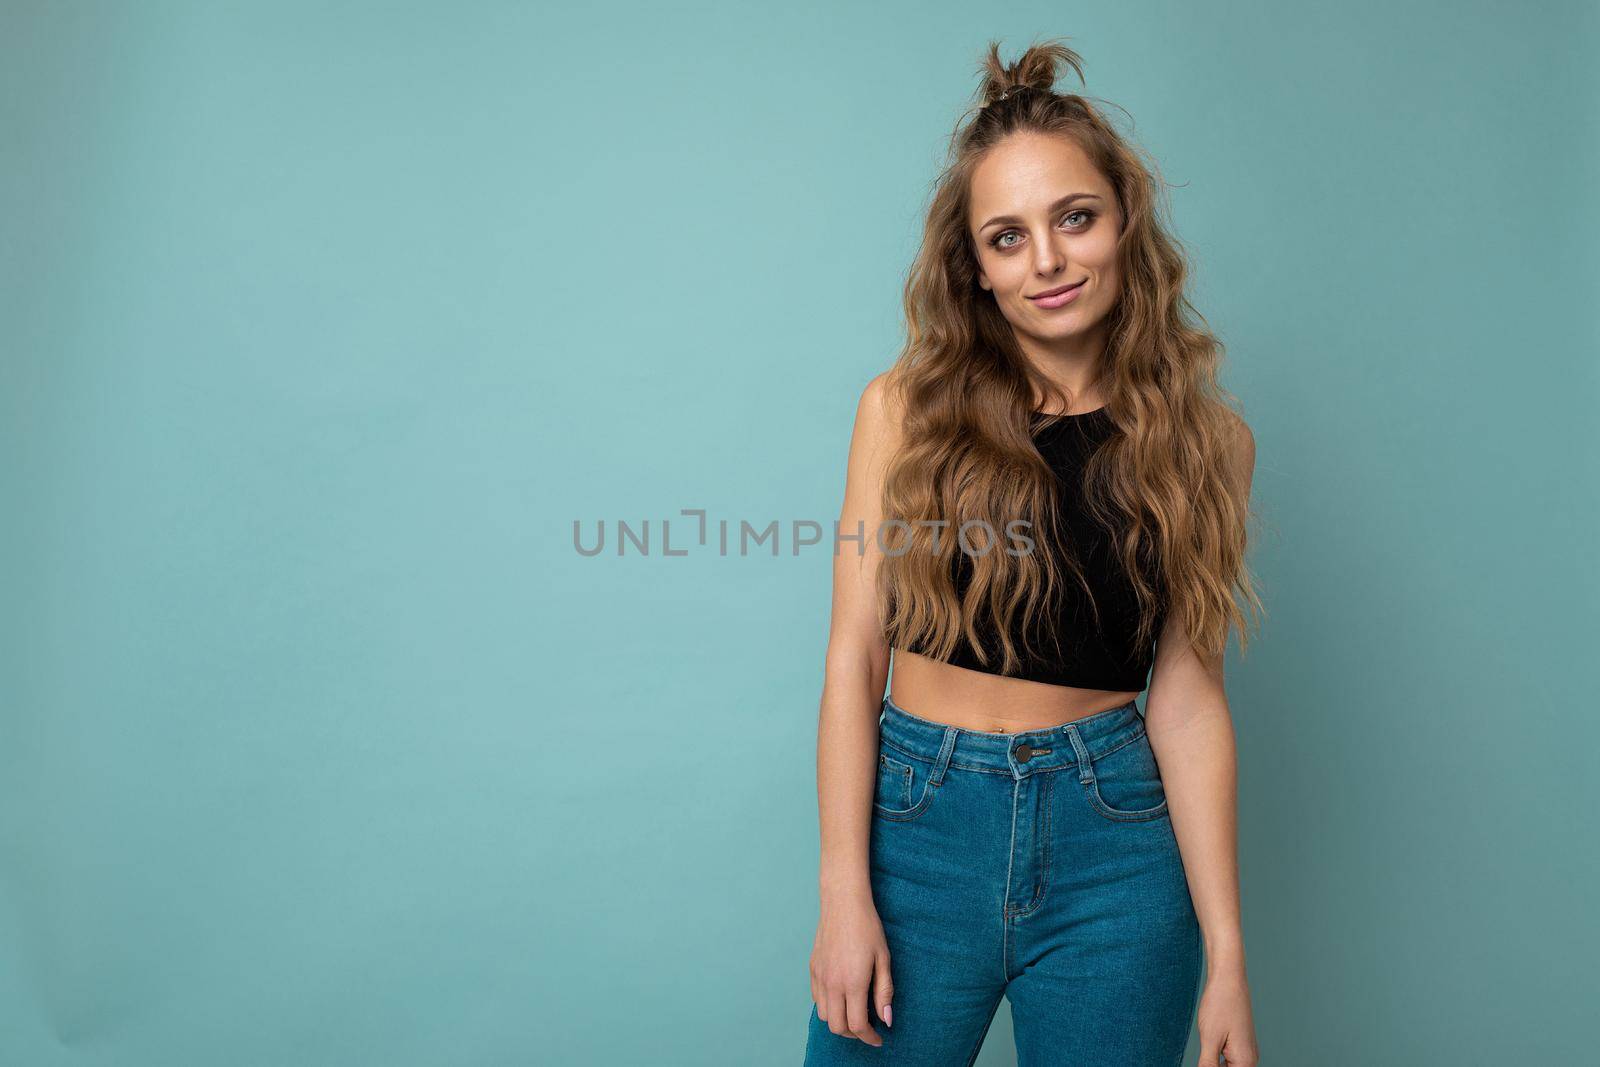 Young beautiful curly blonde woman with sexy expression, cheerful and happy face wearing trendy black top isolated over blue background with copy space.